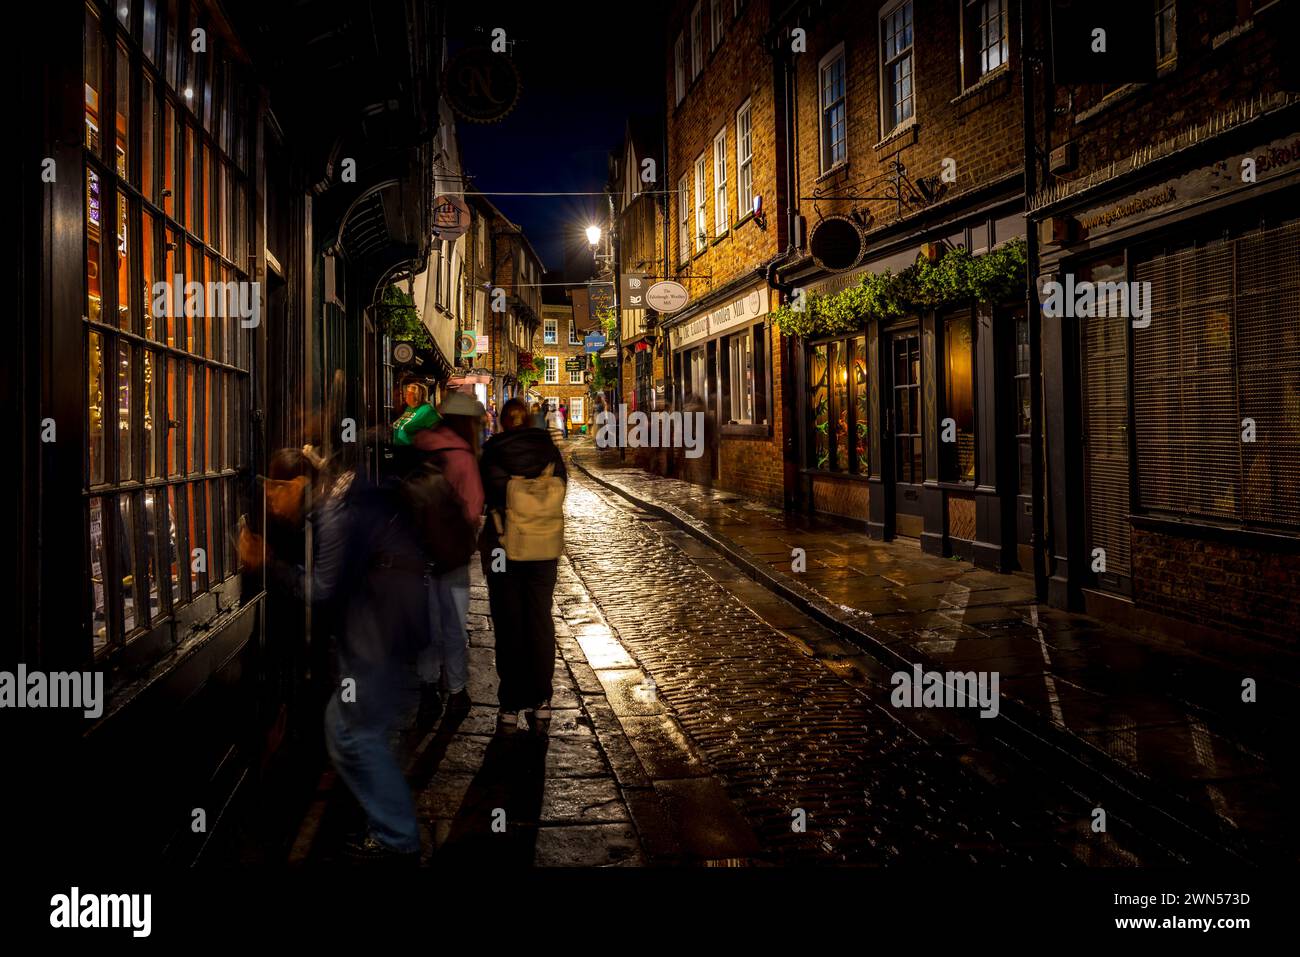 The Shambles at night in York, England. Stock Photo